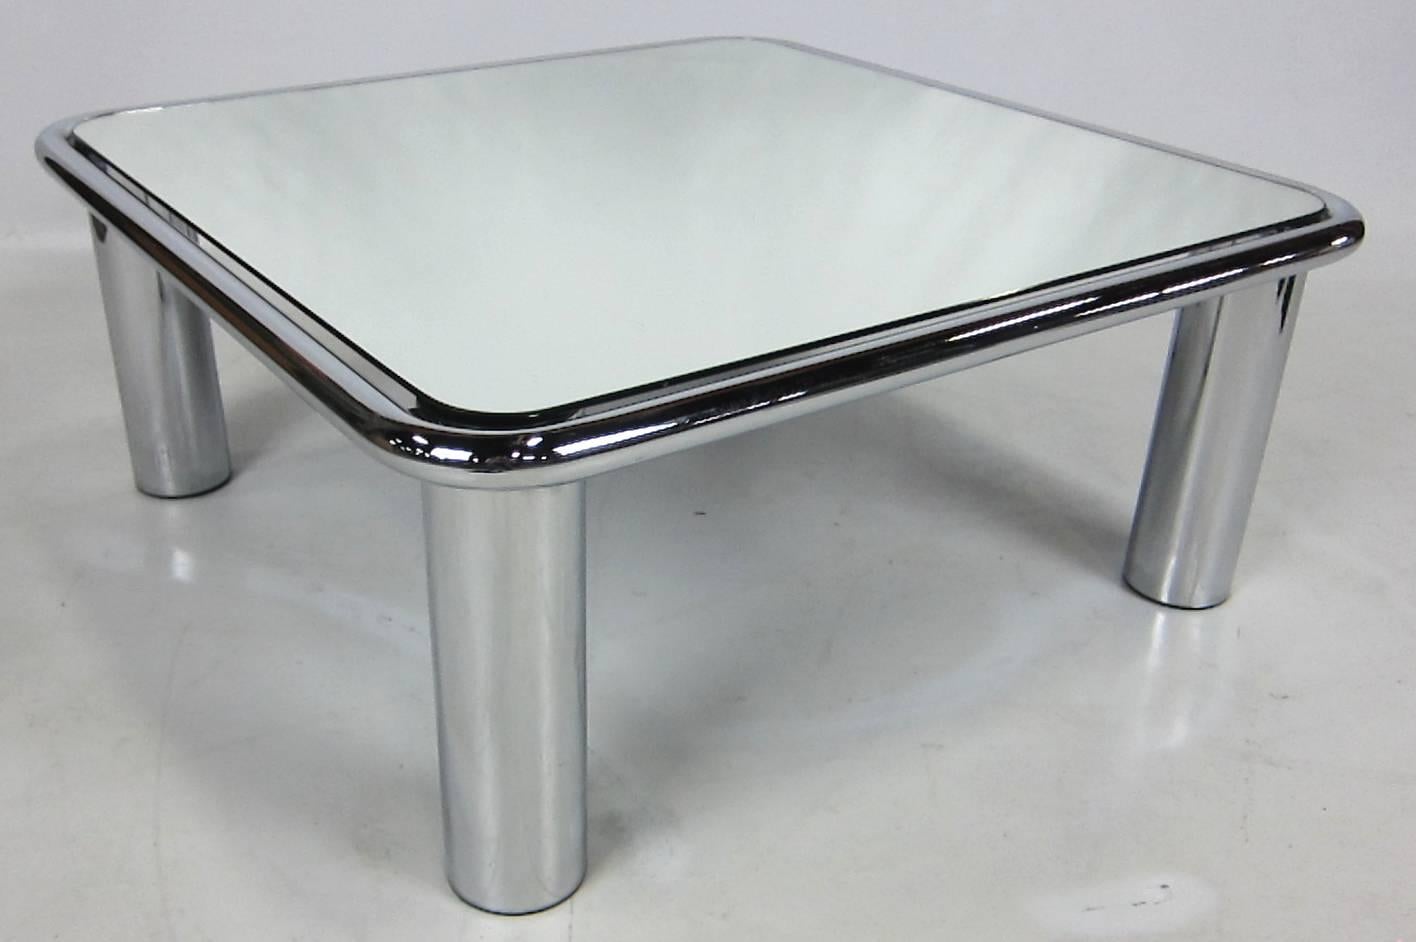 Stylish 1970s chrome coffee table with mirrored top by Gianfranco Frattini for Cassina. The table is in excellent original condition.